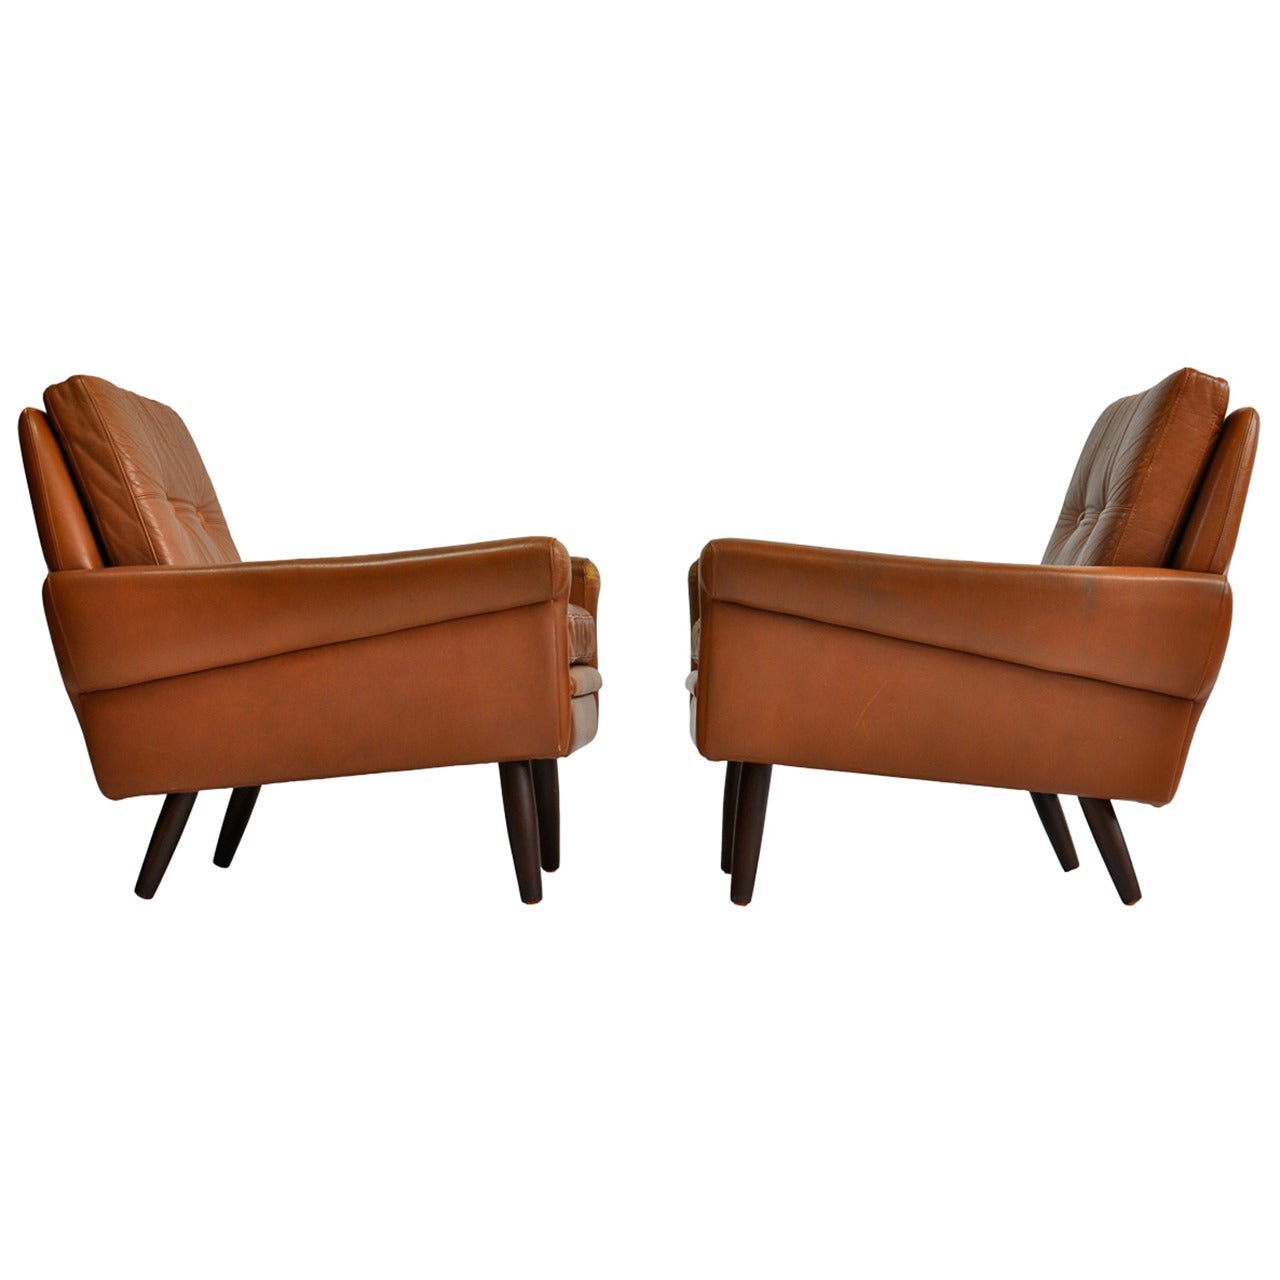 Pair of 1960s Leather Lounge Chairs by Svend Skipper